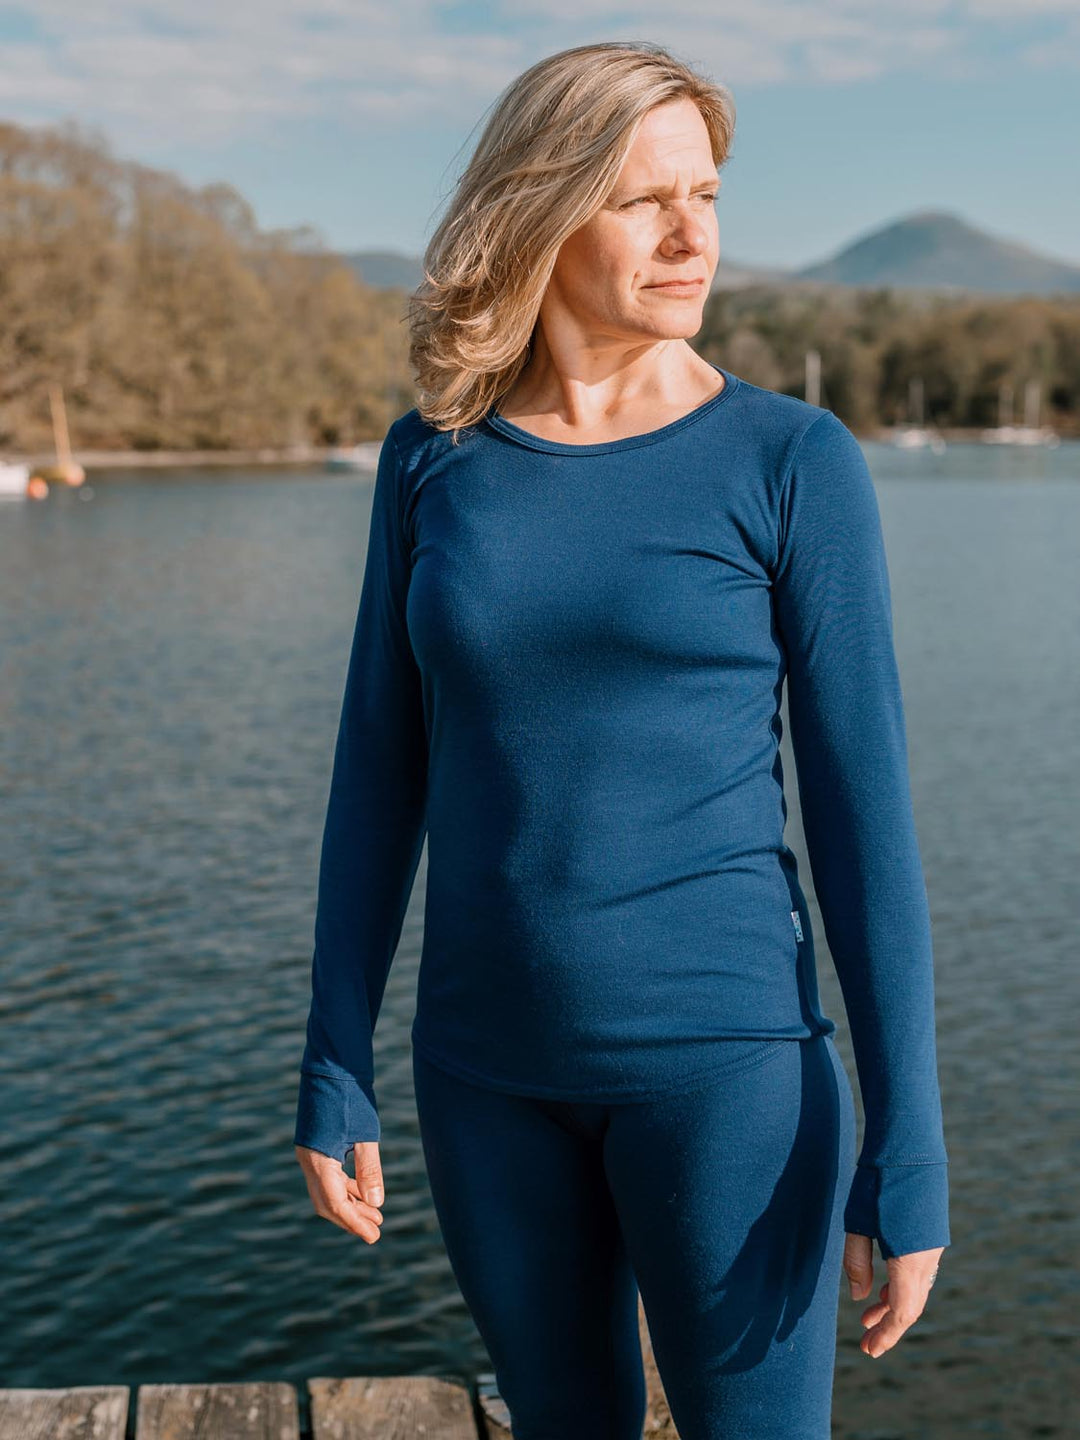 Wholesale merino thermal wear For Intimate Warmth And Comfort